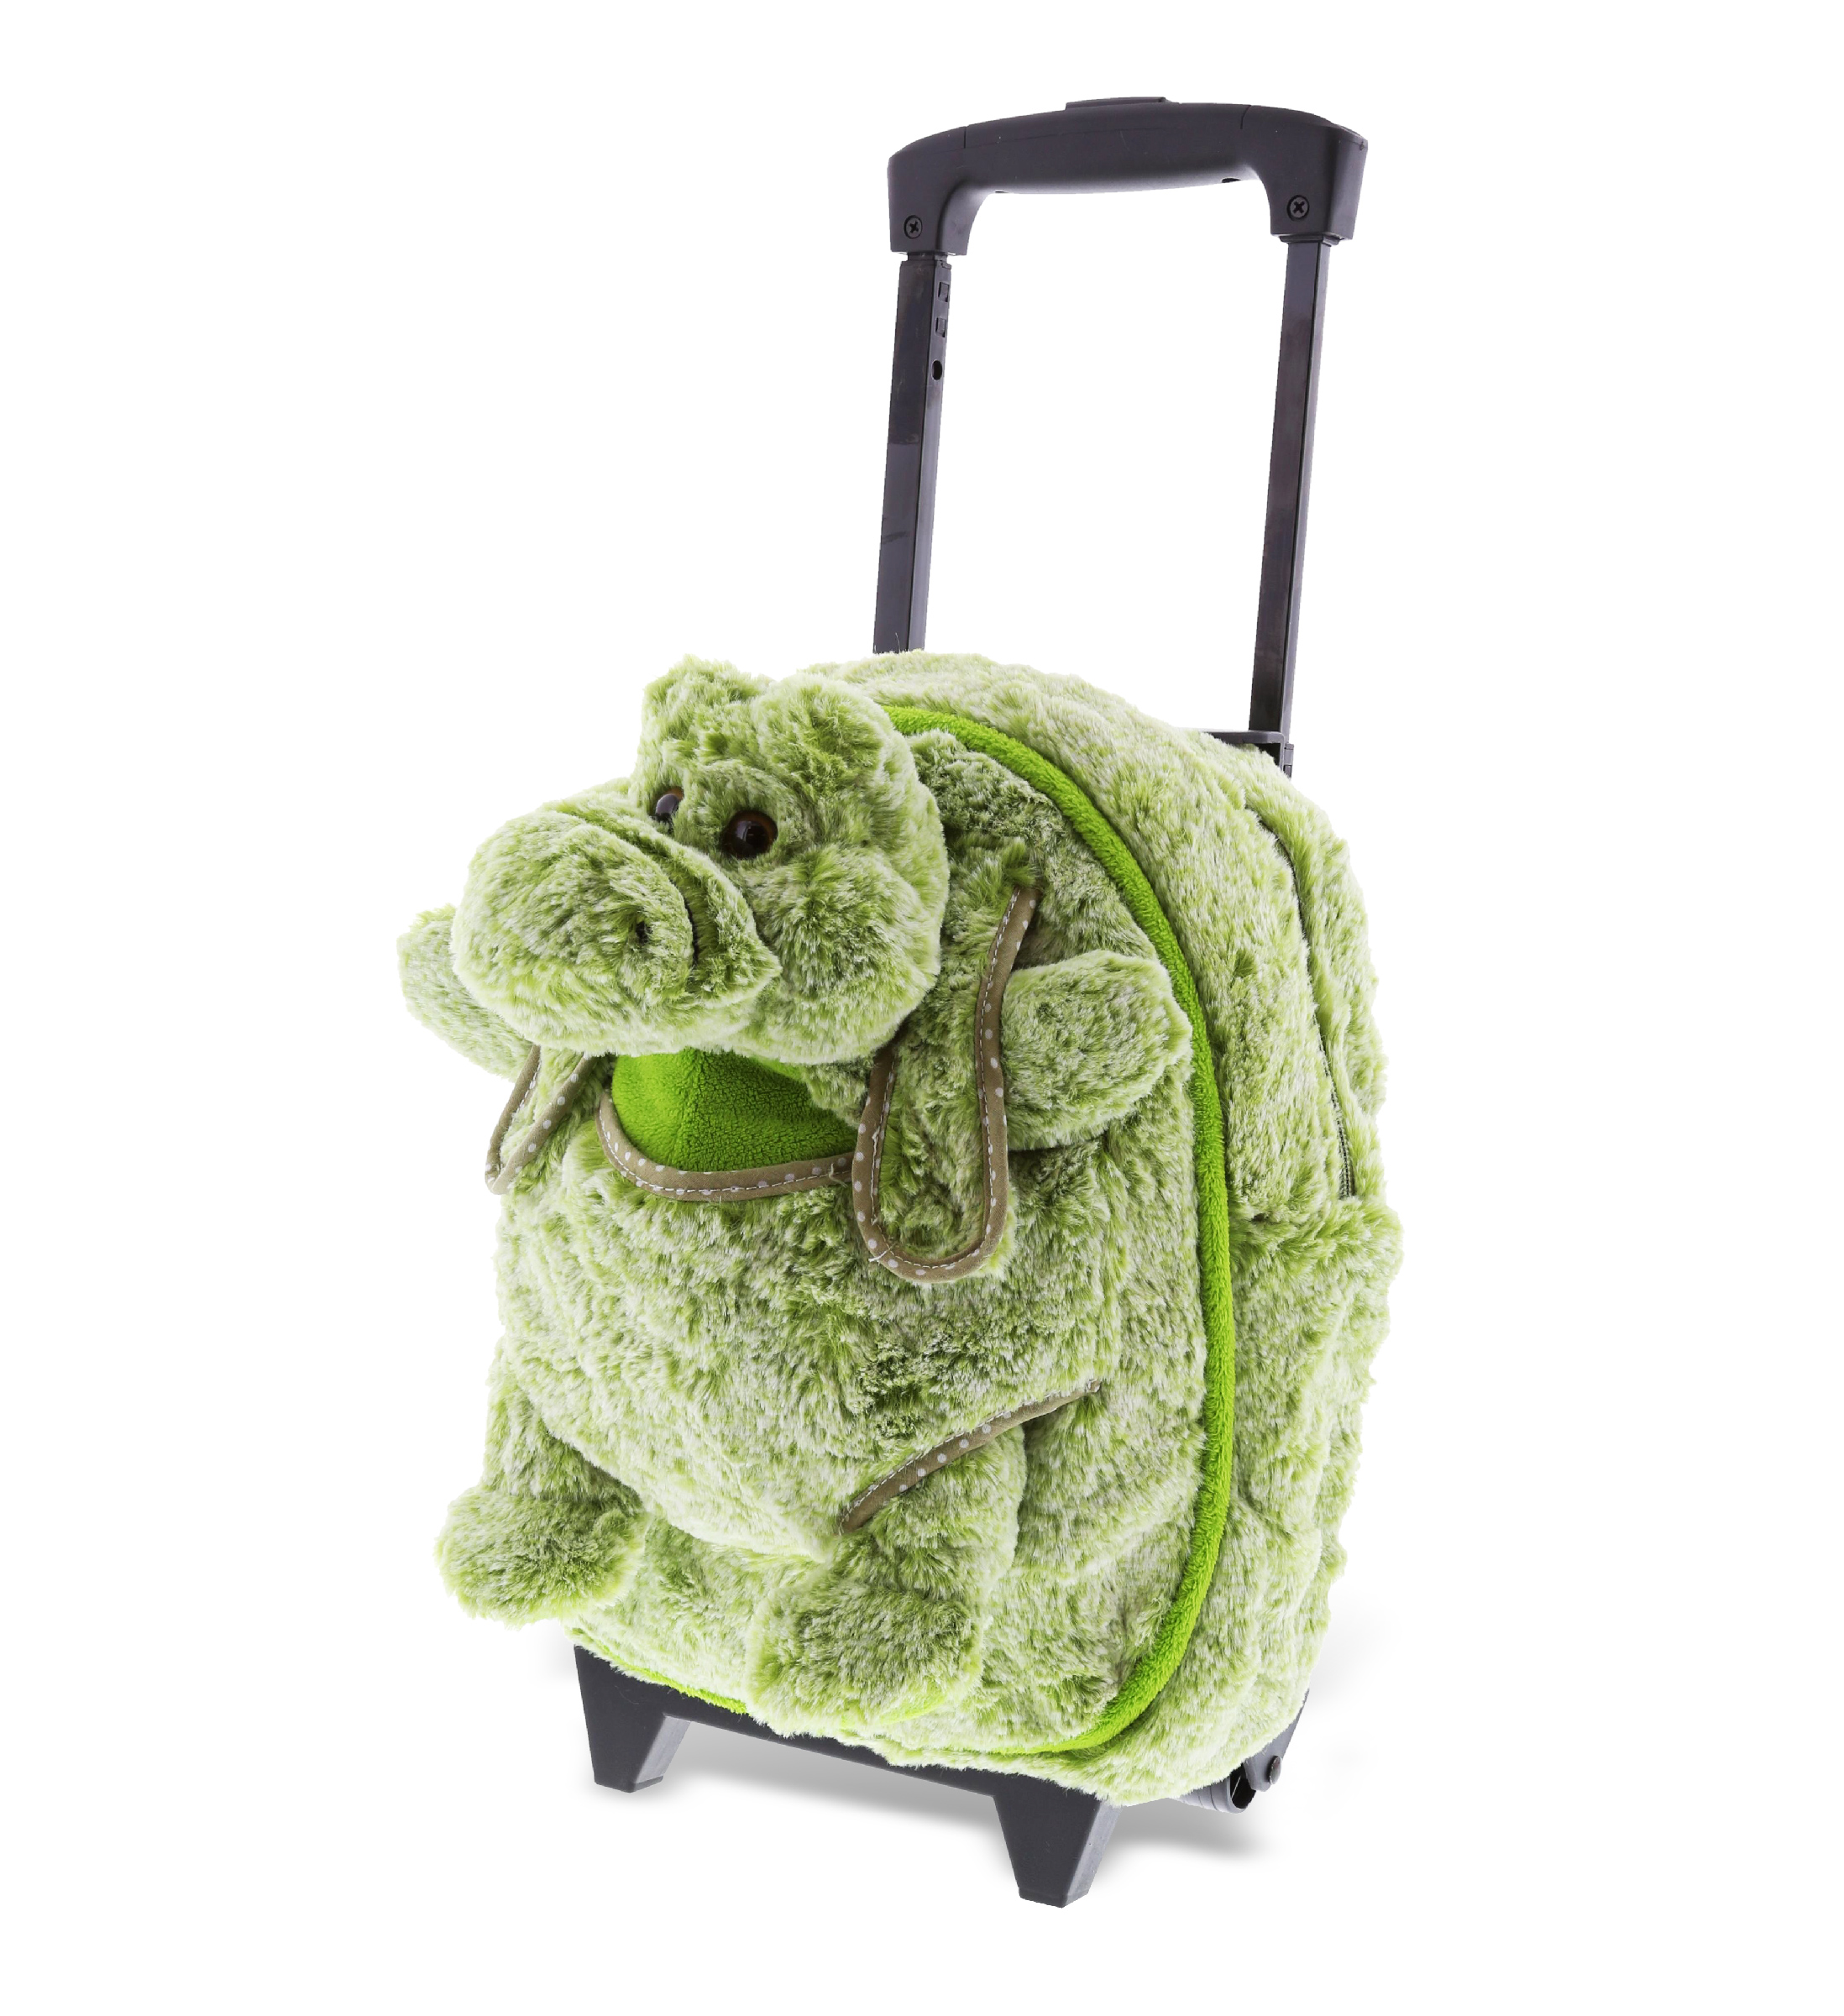  Puzzled DolliBu Alligator Stuffed Animal Backpack - Super Soft Plush  Stuffed Animal Bag for Children Accessories, Kids First Travel Plush Bag Toy,  Cute Alligator Backpack - 14 : Toys & Games